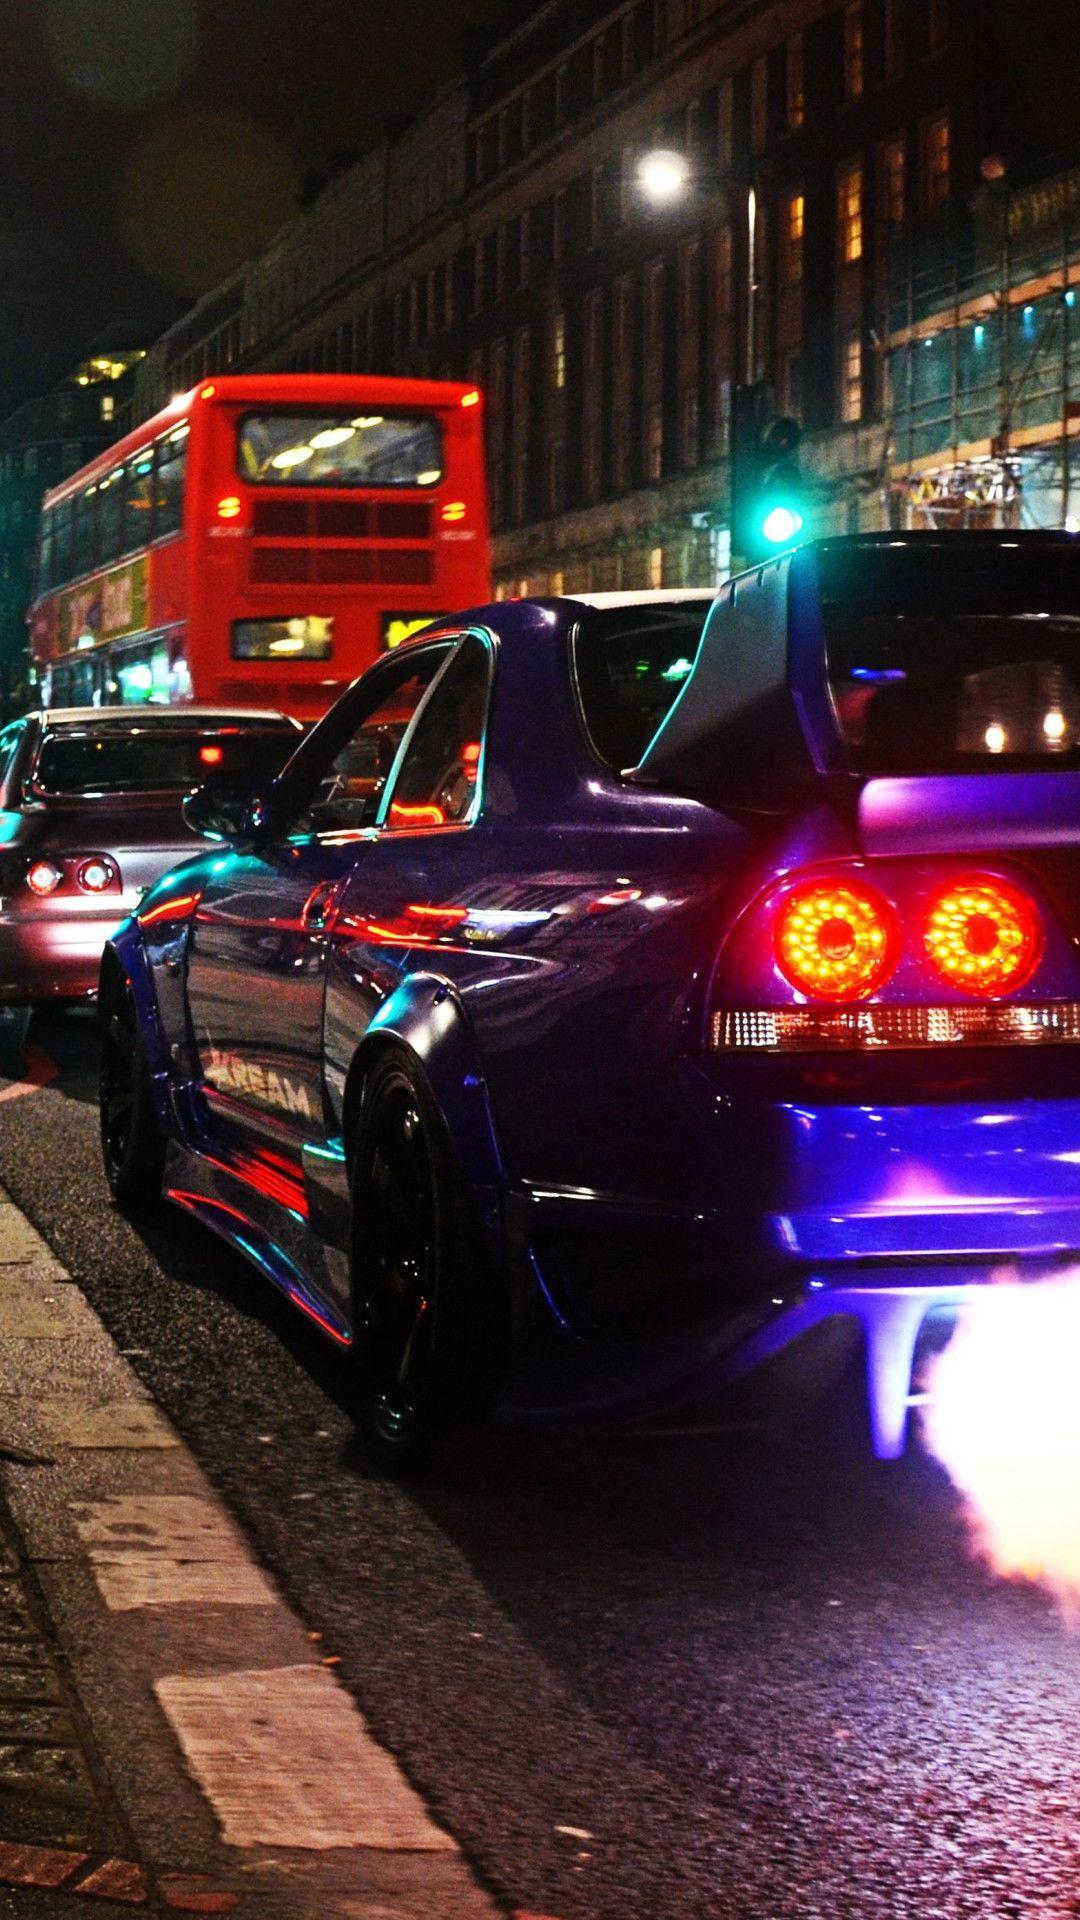 Nissan R33 Wallpapers Top Free Nissan R33 Backgrounds Wallpaperaccess